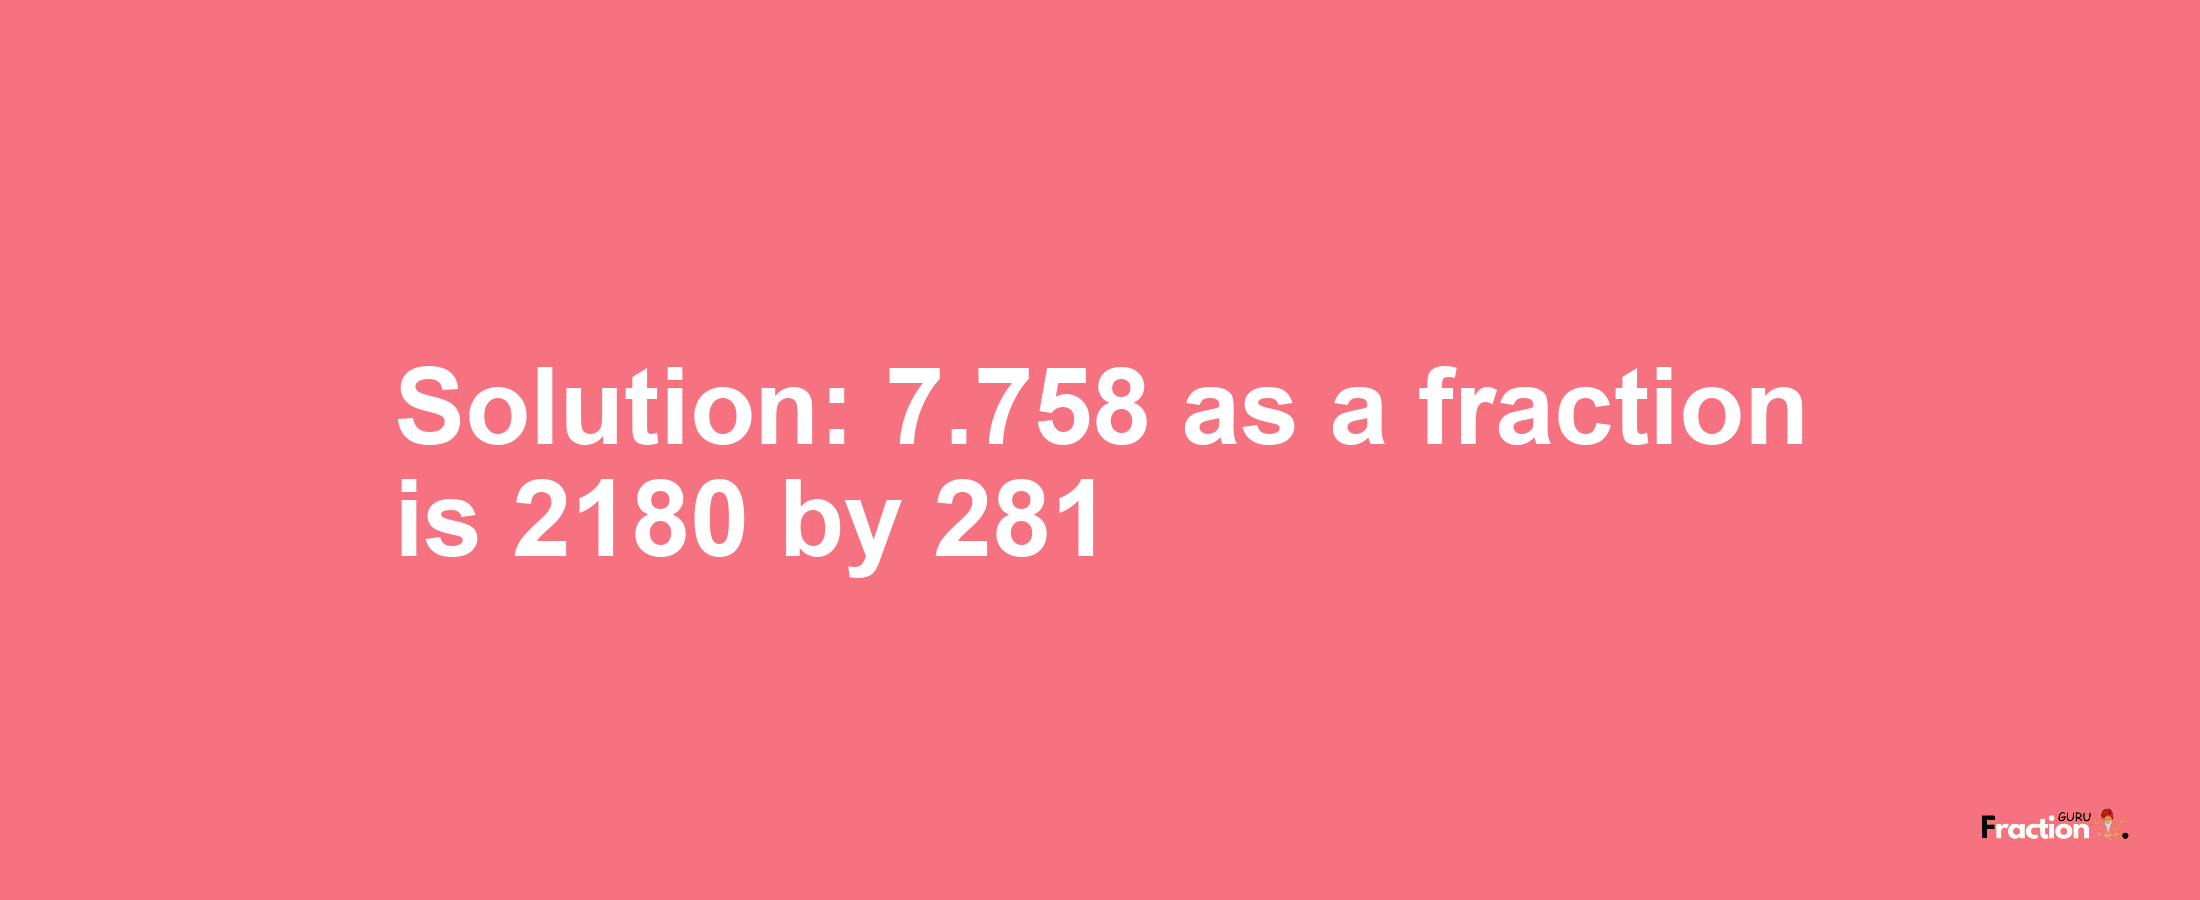 Solution:7.758 as a fraction is 2180/281